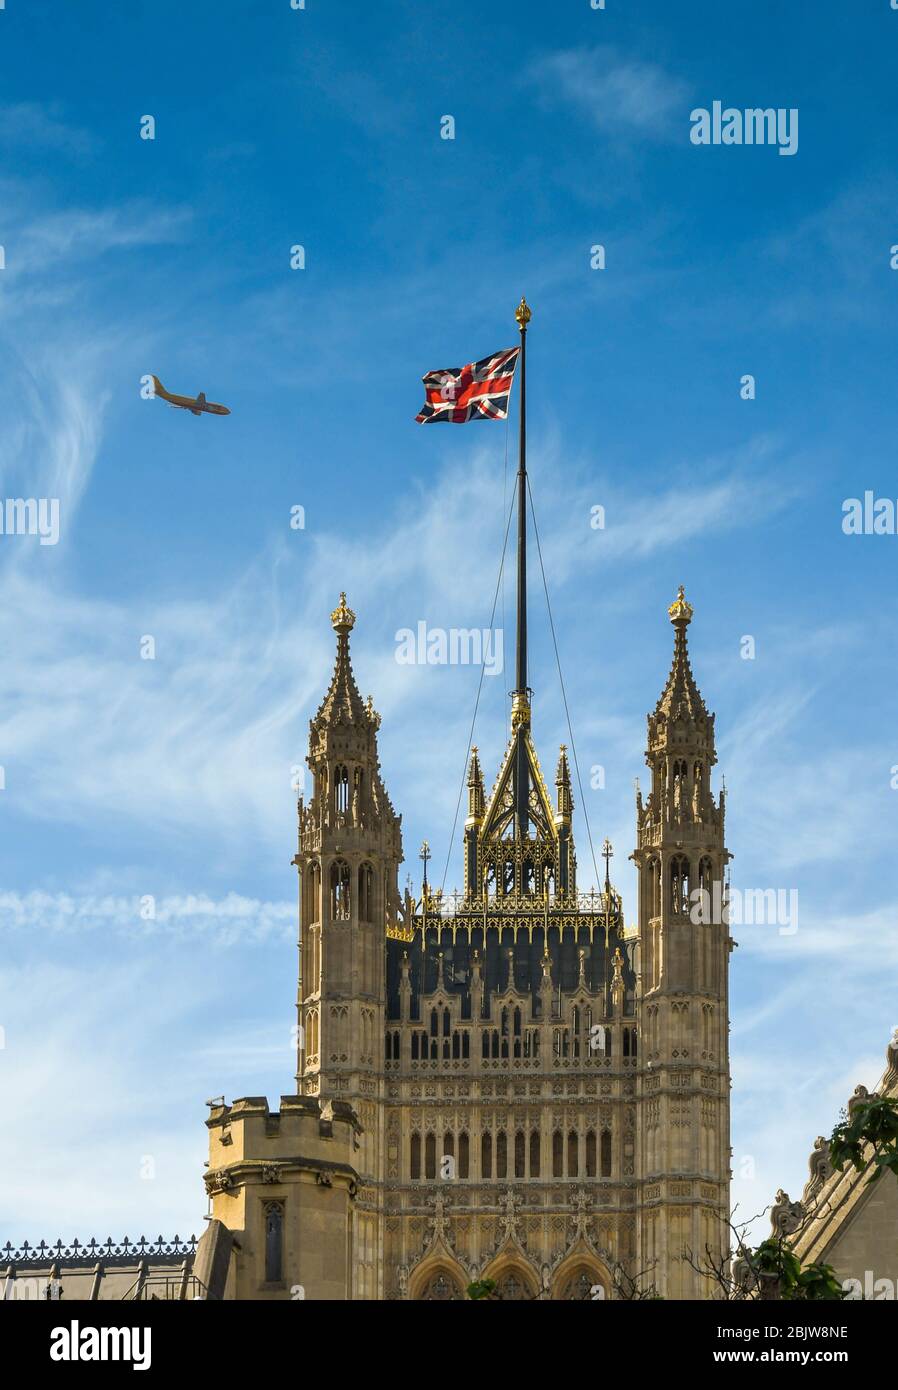 LONDON, ENGLAND - JUNE 2018: The Victoria Tower in the Palace of Westminster with the Union Jack flag flying and a passing jet Stock Photo